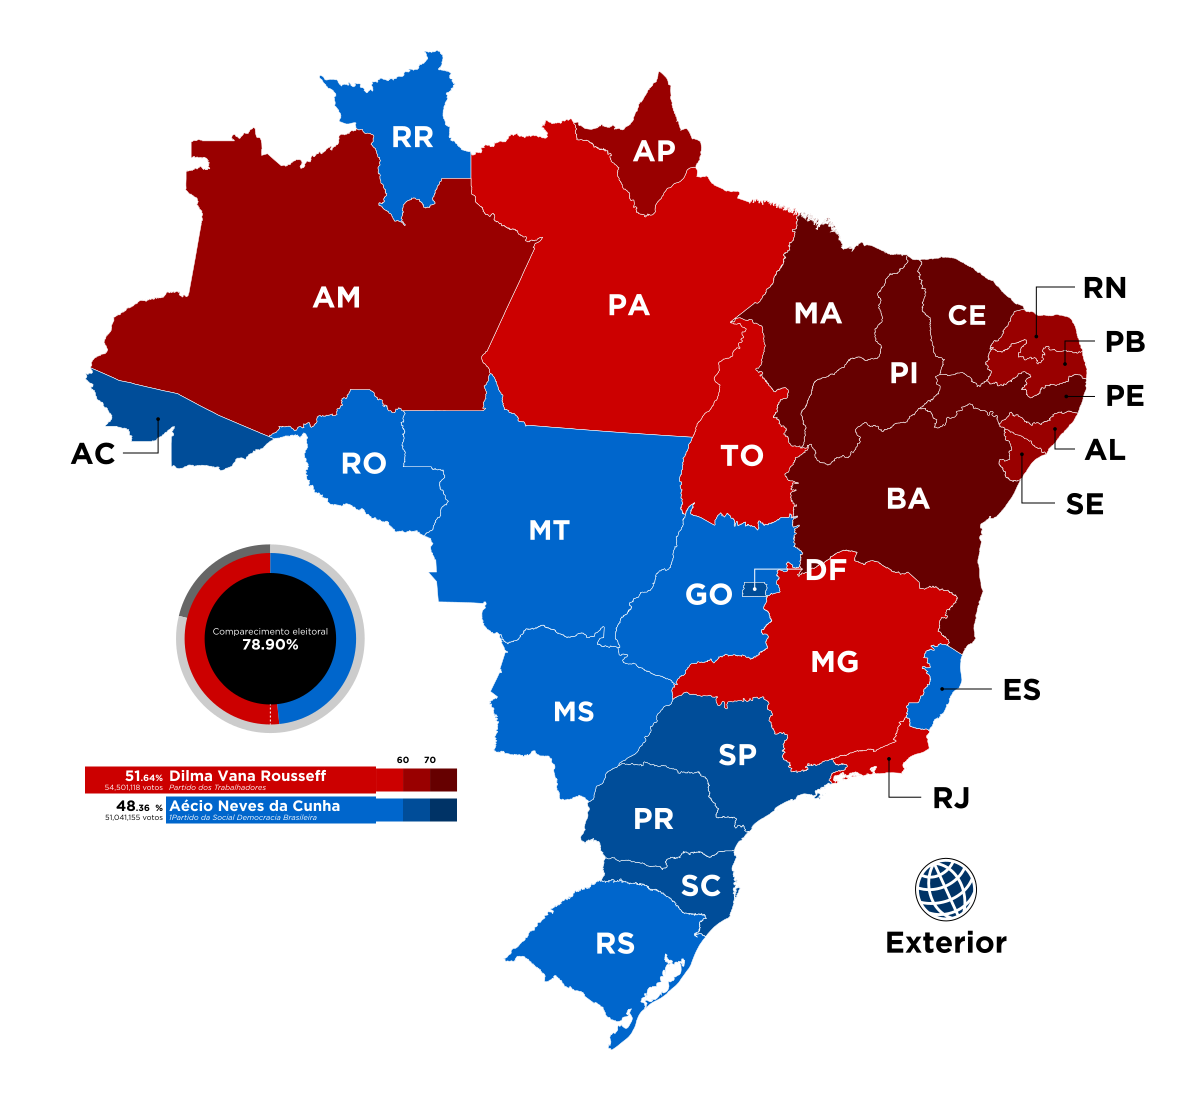 Workers' Party (Brazil) - Wikipedia